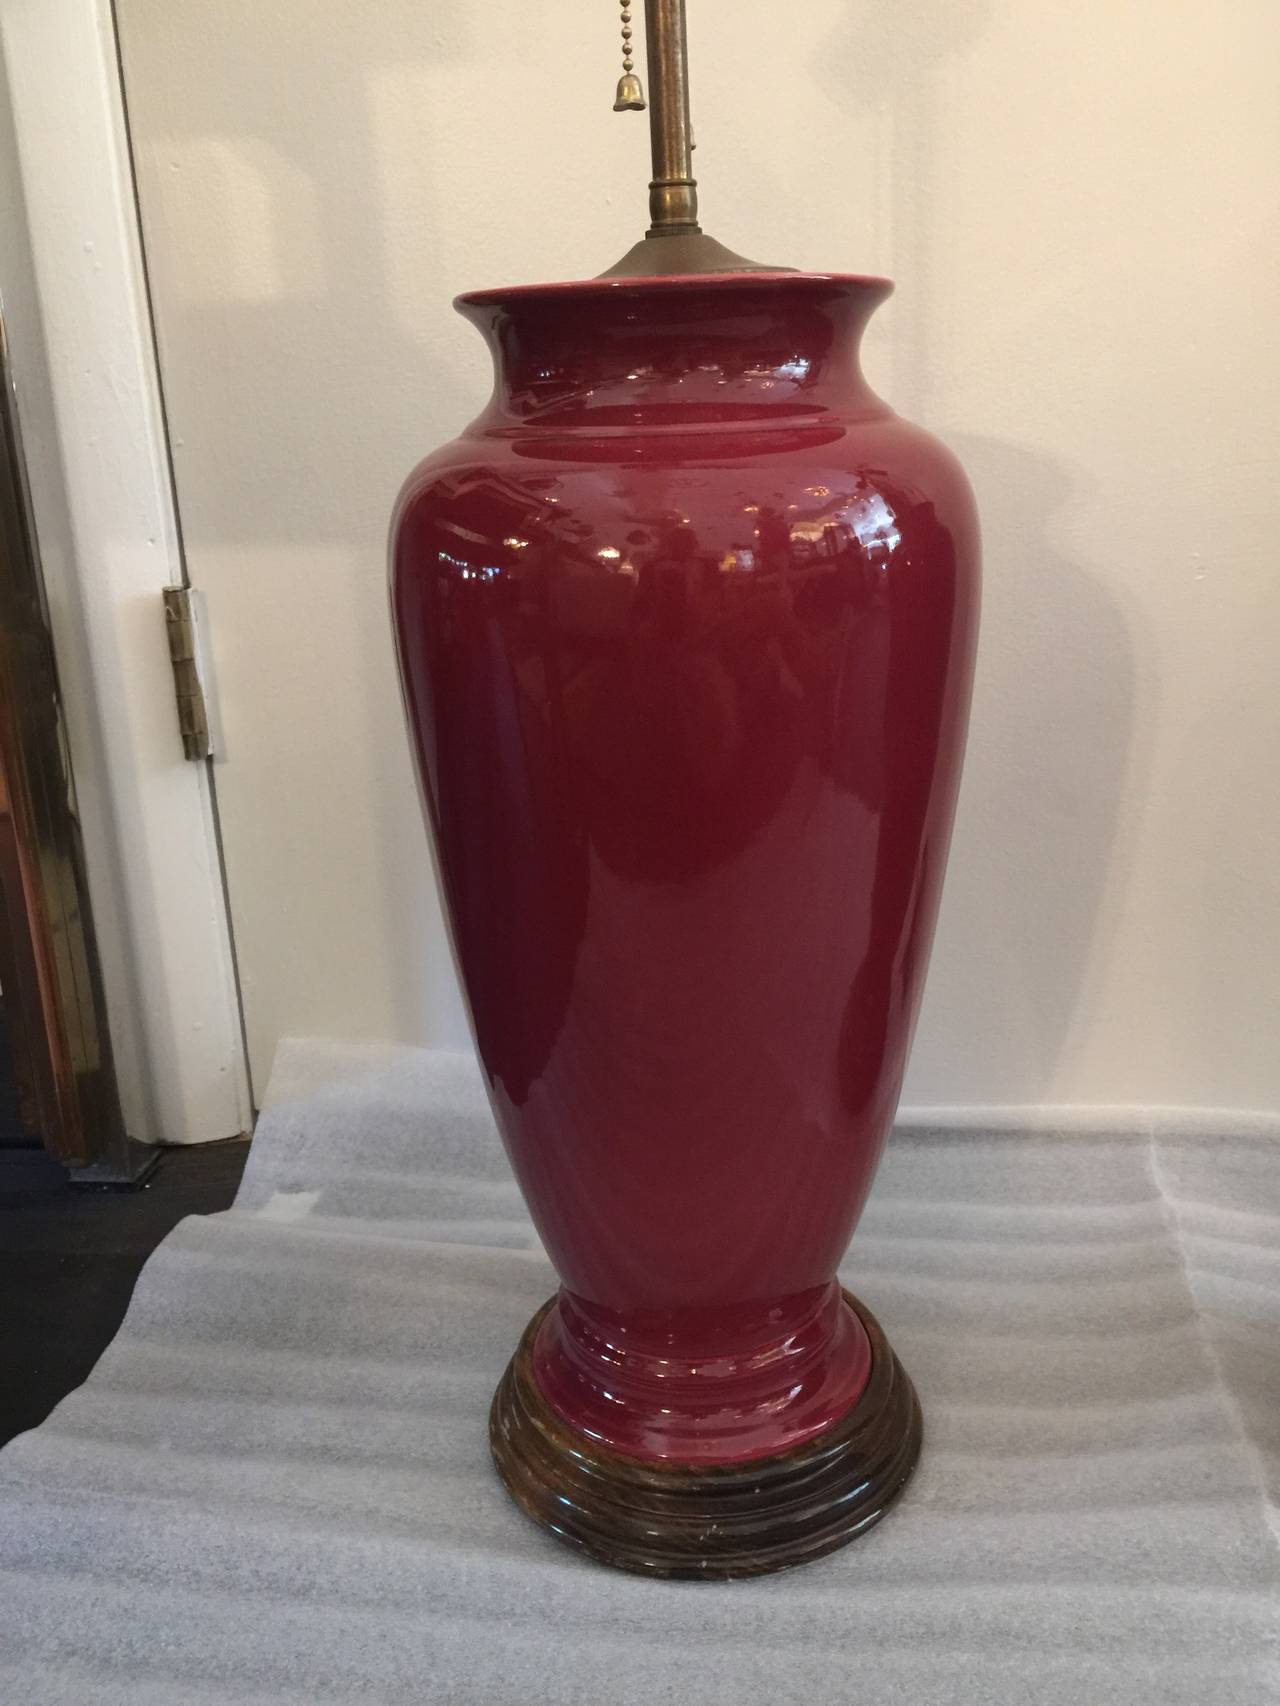 All original, these oxblood toned lamps with mahogany bases and double light sockets are in extremely well preserved vintage condition.